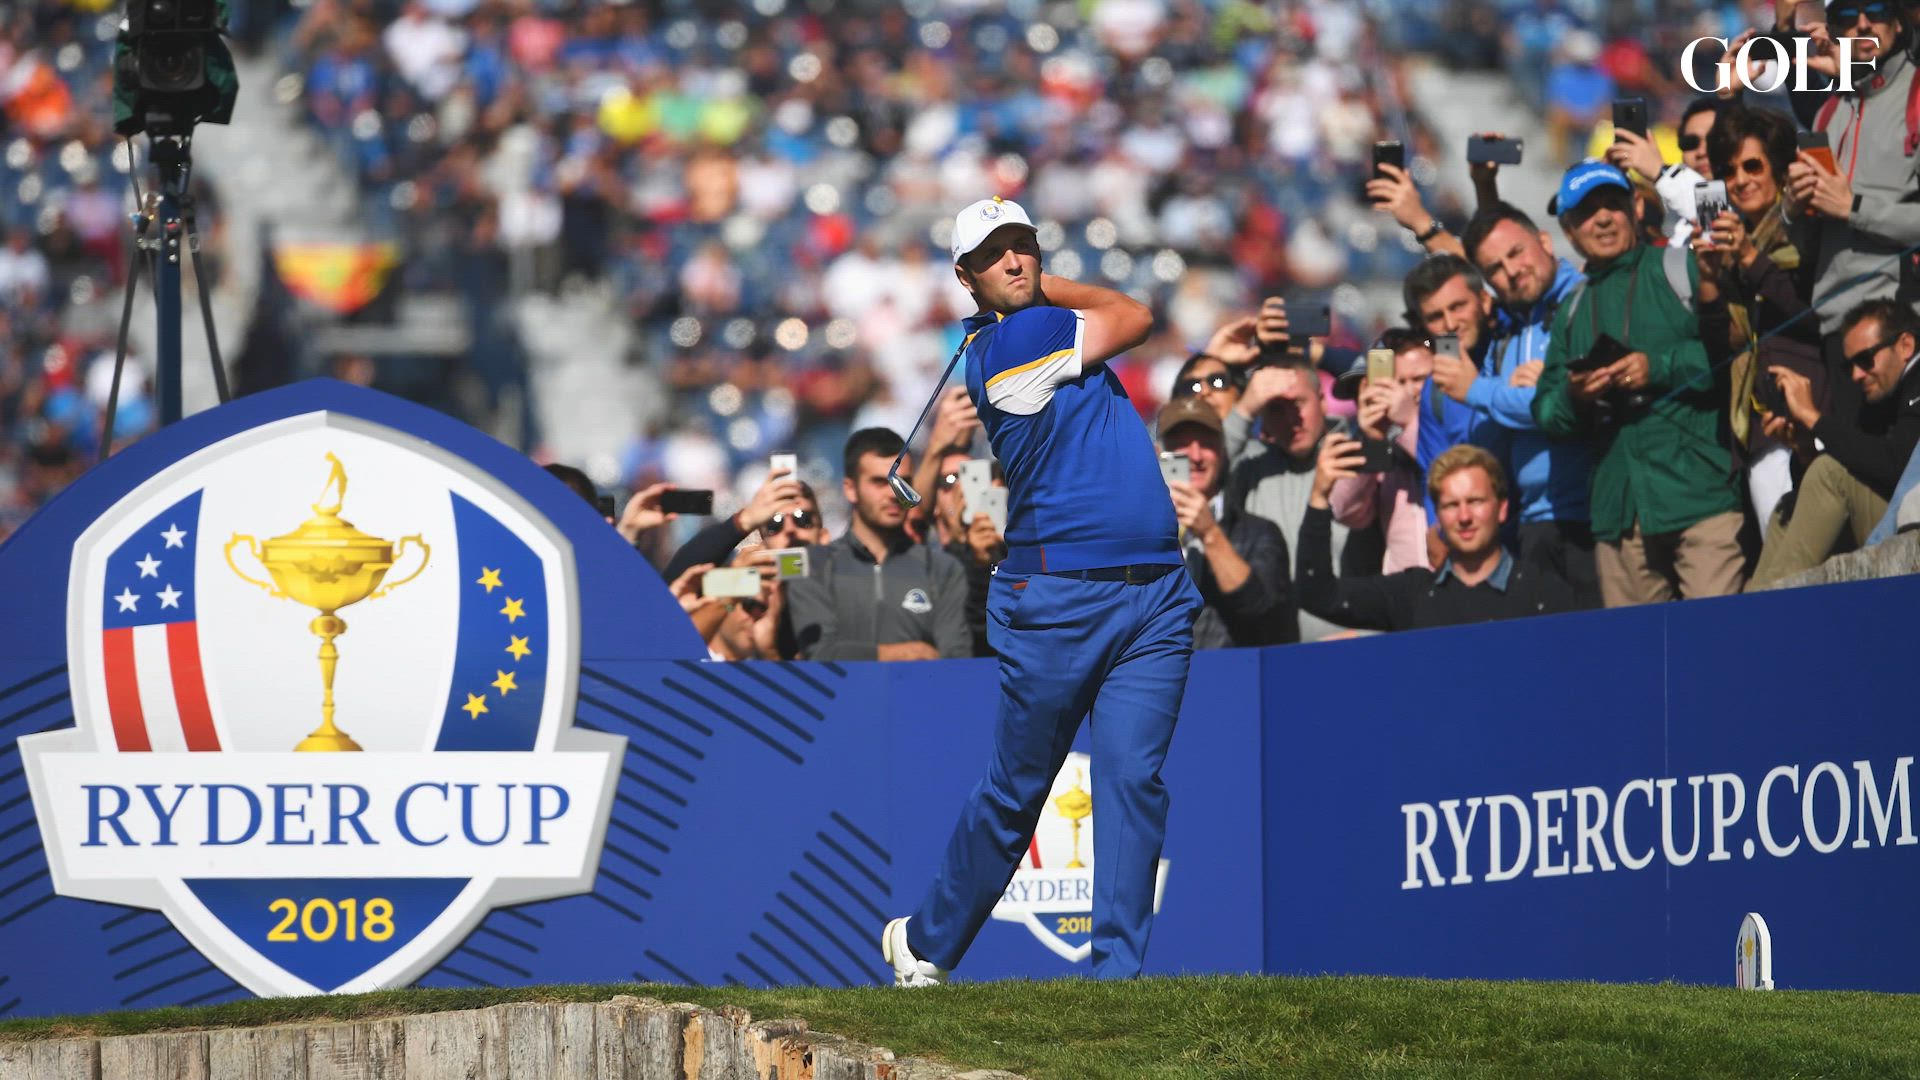 Are the Euros Ryder Cup underdogs? We ask Jon Rahm